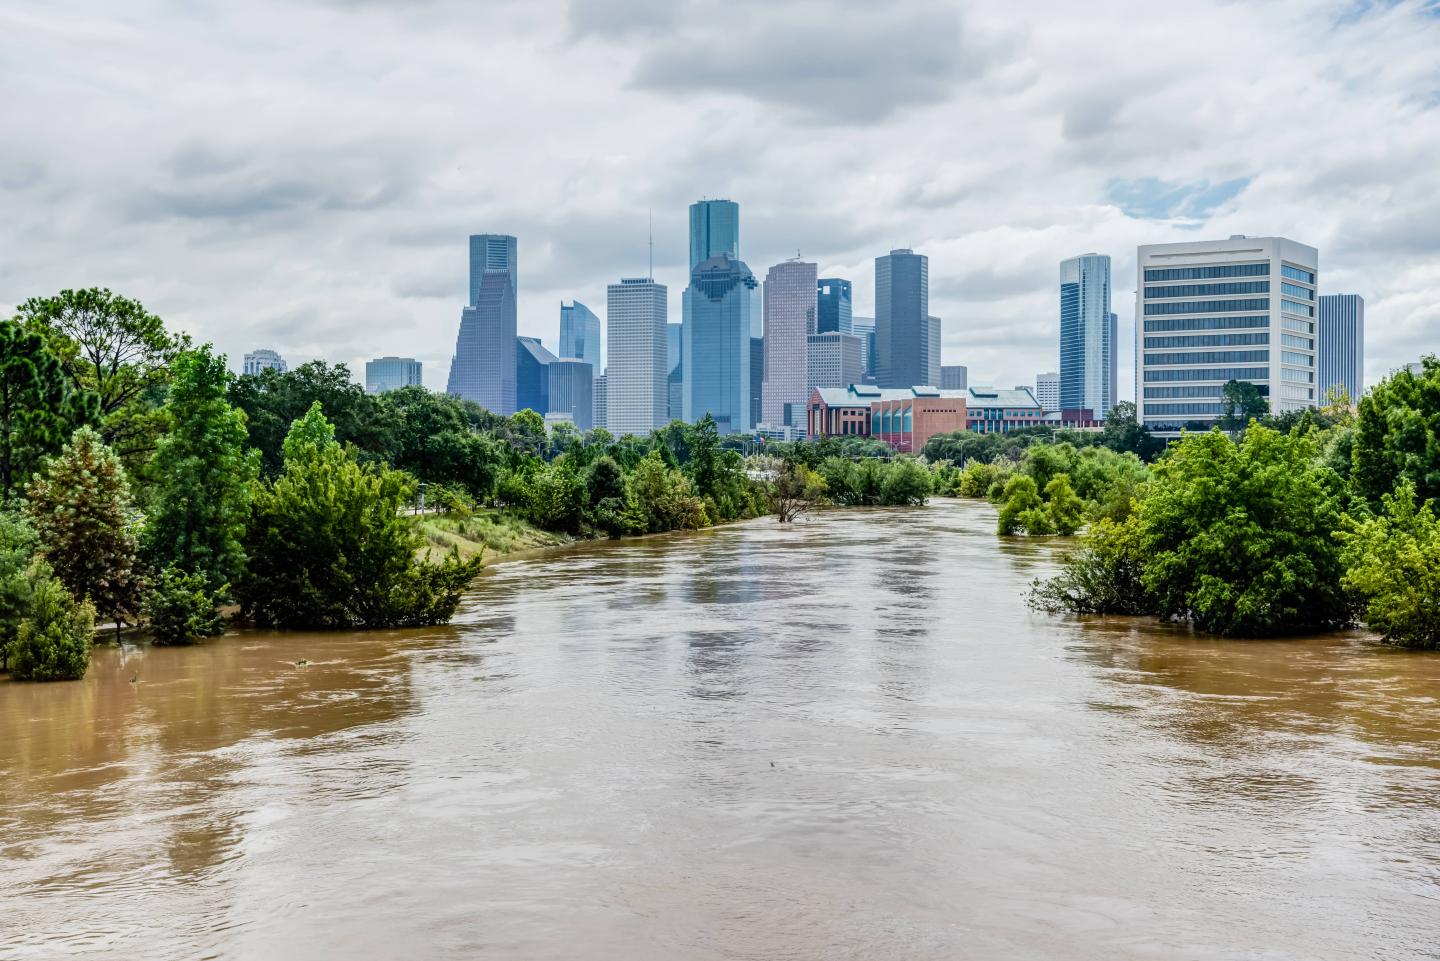 Flooded waters in the foreground with a city skyline in the background